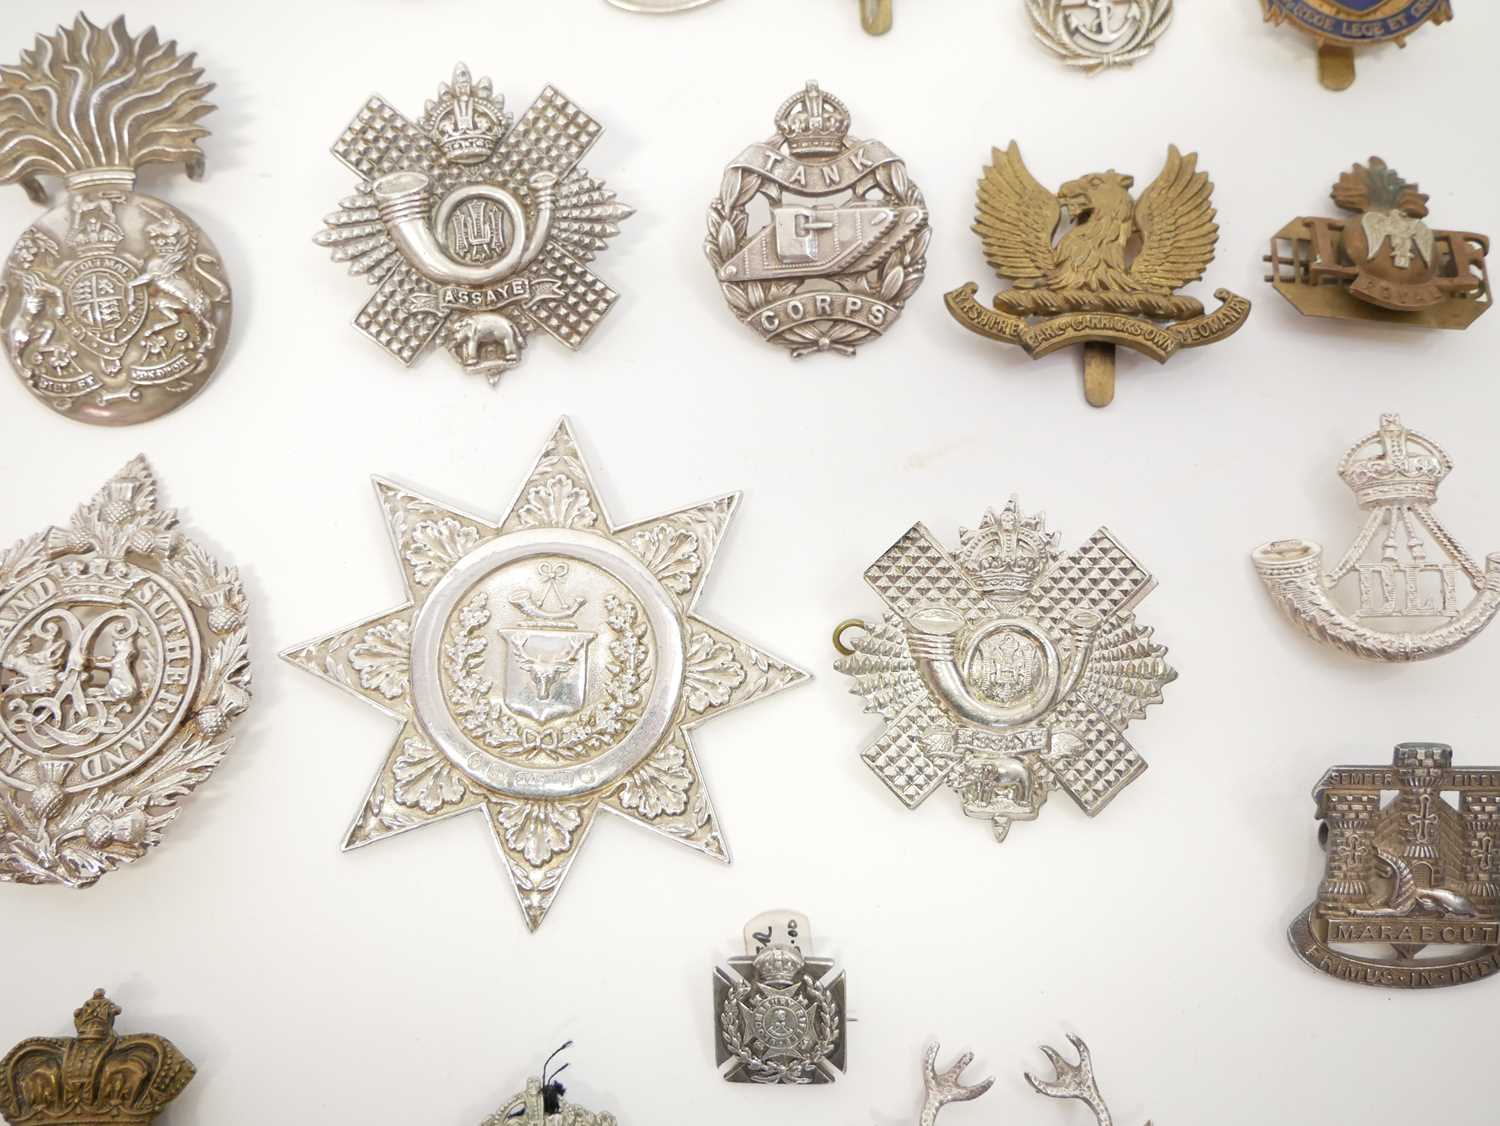 Twenty six British Army cap badges and Scottish clan badges, ten of which are Sterling silver. - Image 6 of 23